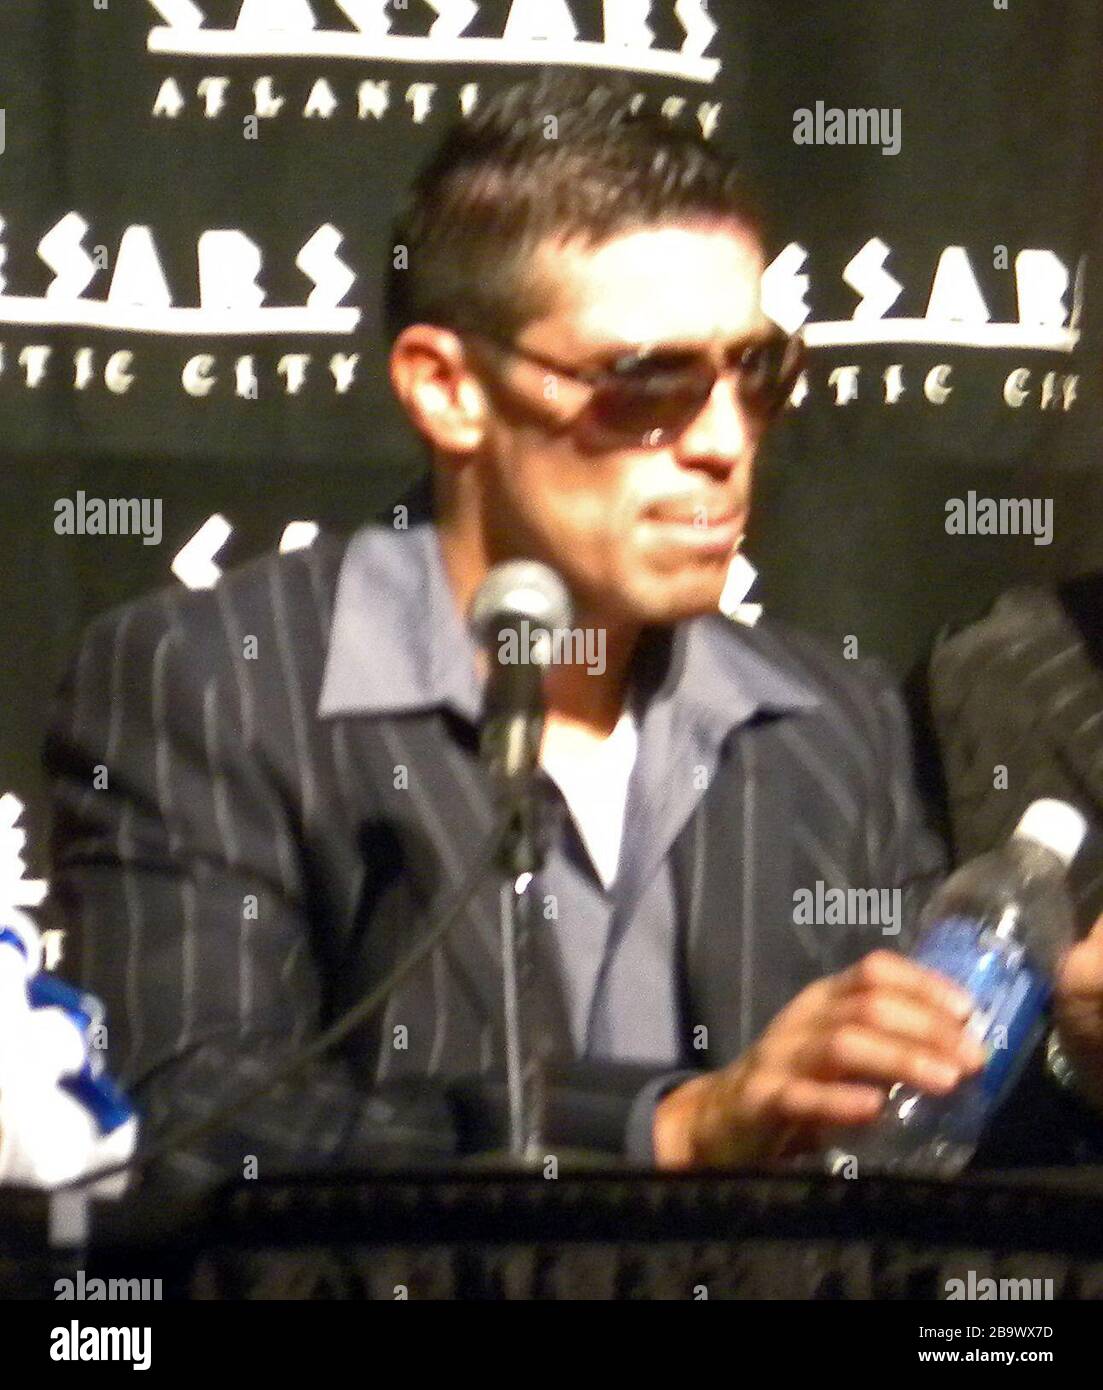 'English: Sergio Gabriel Martínez at a press conference in Boardwalk Hall in Atlantic City. (cropped); 18 April 2010; Uncropped File:Sergio Gabriel Martínez.jpg transferred from en.wikipedia; transfer was stated to be made by User:Akira Kouchiyama.  (Original text:  I Robert Brizel created this work entirely by myself.); Robert Brizel; ' Stock Photo